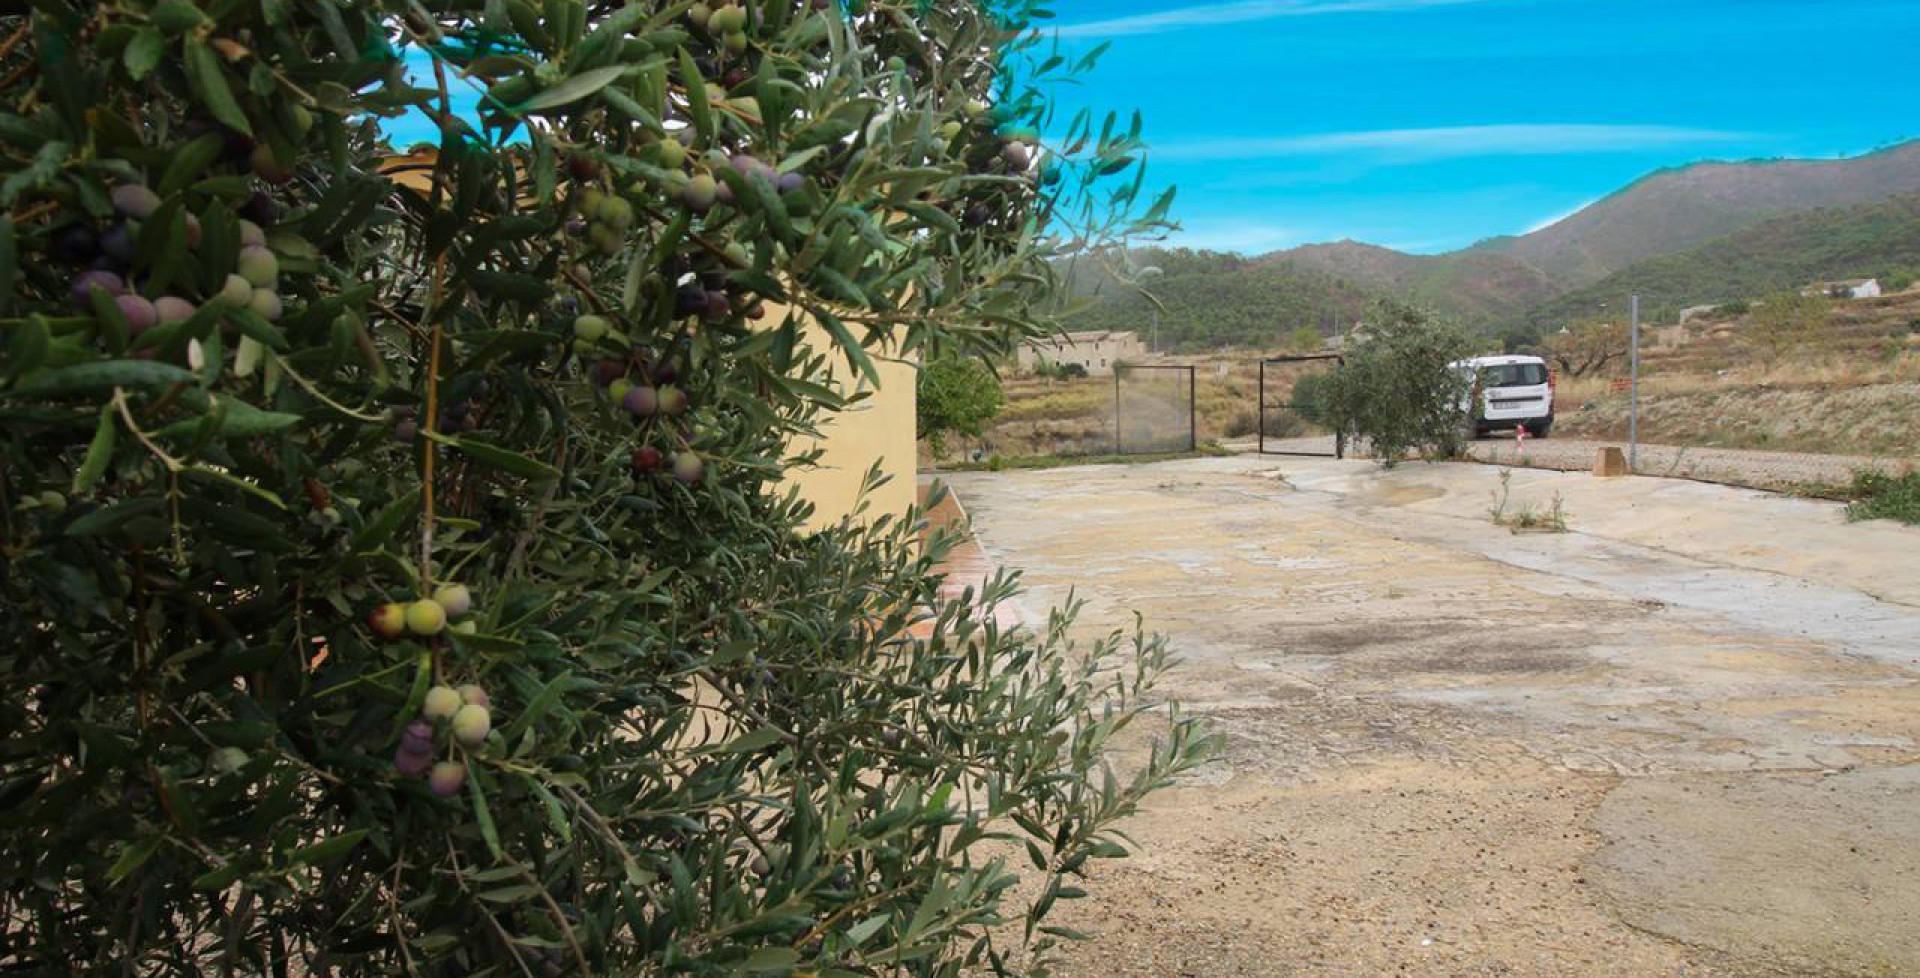 For Sale - Country House - Ricote